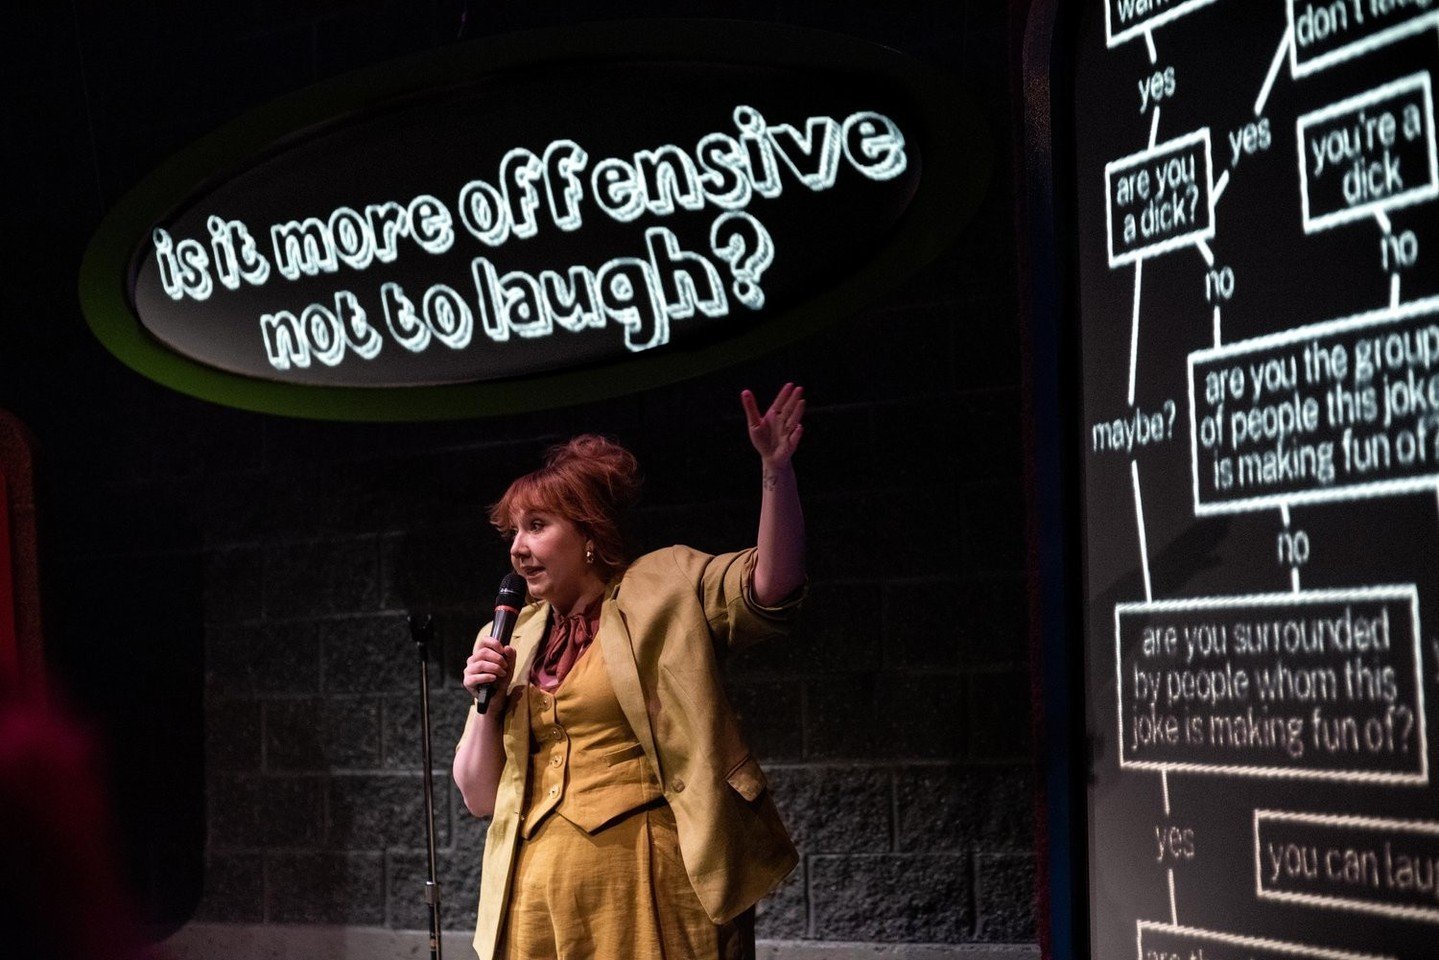 Theatre review: Fat Joke's brutally honest comedy-talk is a fearless indictment of fatphobia.⁠
⁠
Theatre schools, the BMI, critics, and casting auditions: everything&rsquo;s fair game in a show that flips easily between biting, big laughs and darker 